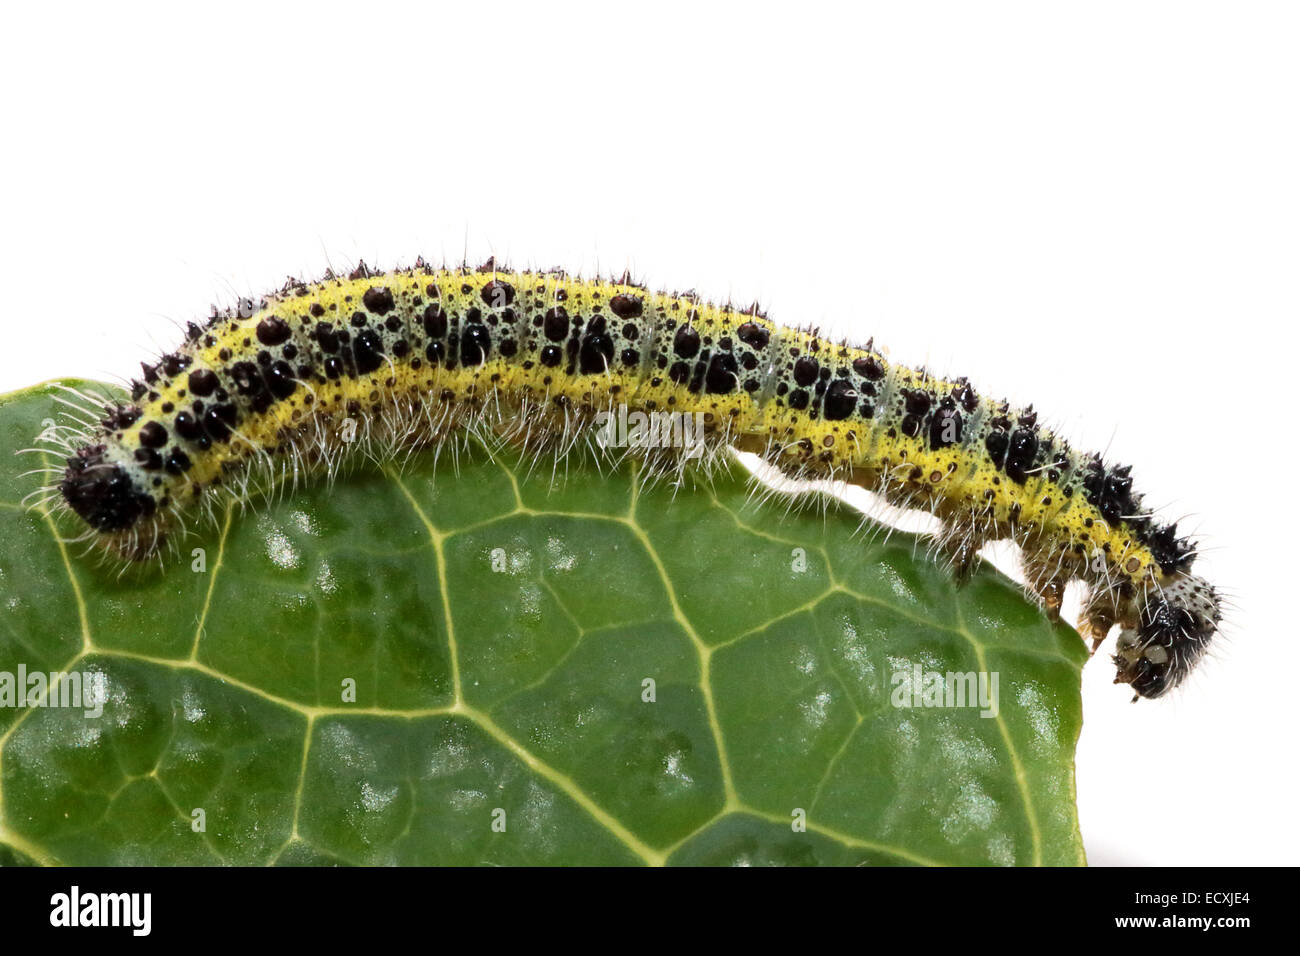 Side view of a caterpillar of large cabbage white butterfly, Pieris brassicae, on a leaf of savoy cabbage Stock Photo